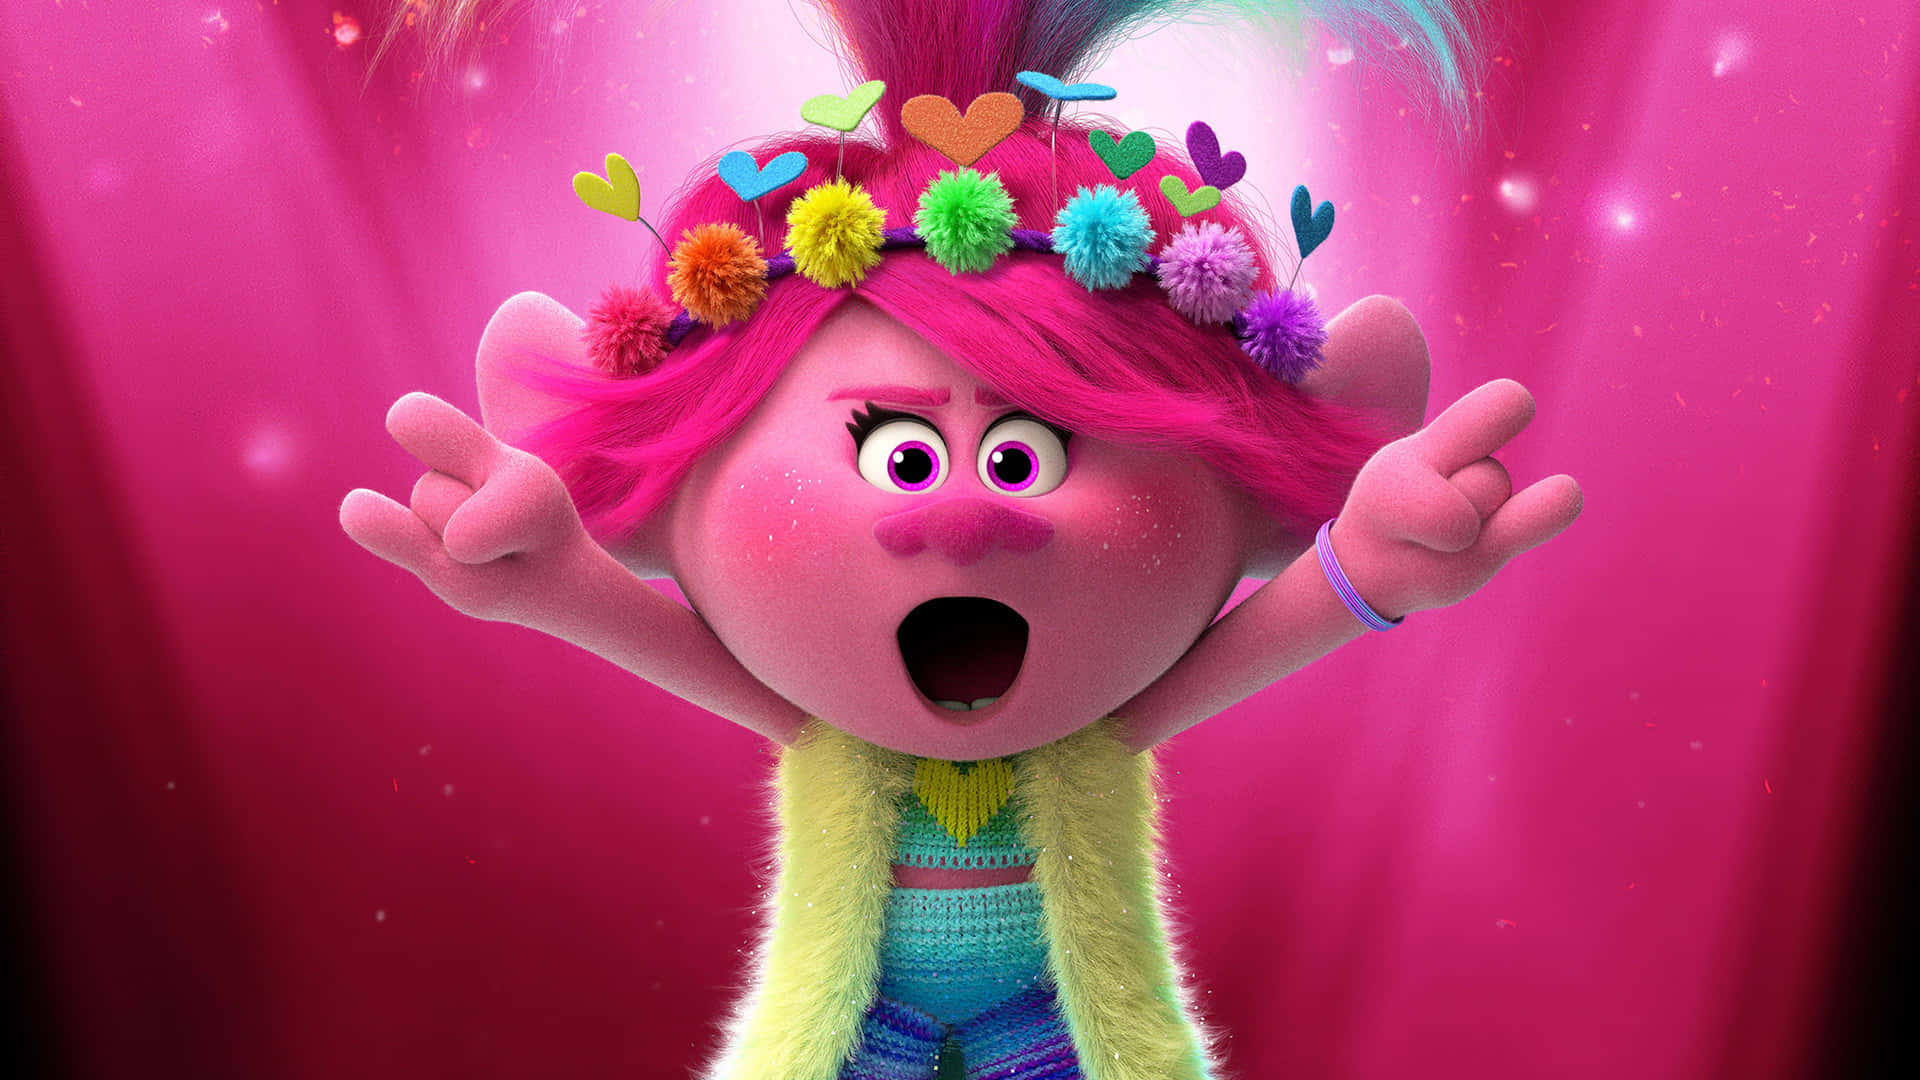 Join the Trolls in a dance celebration for your next adventure!